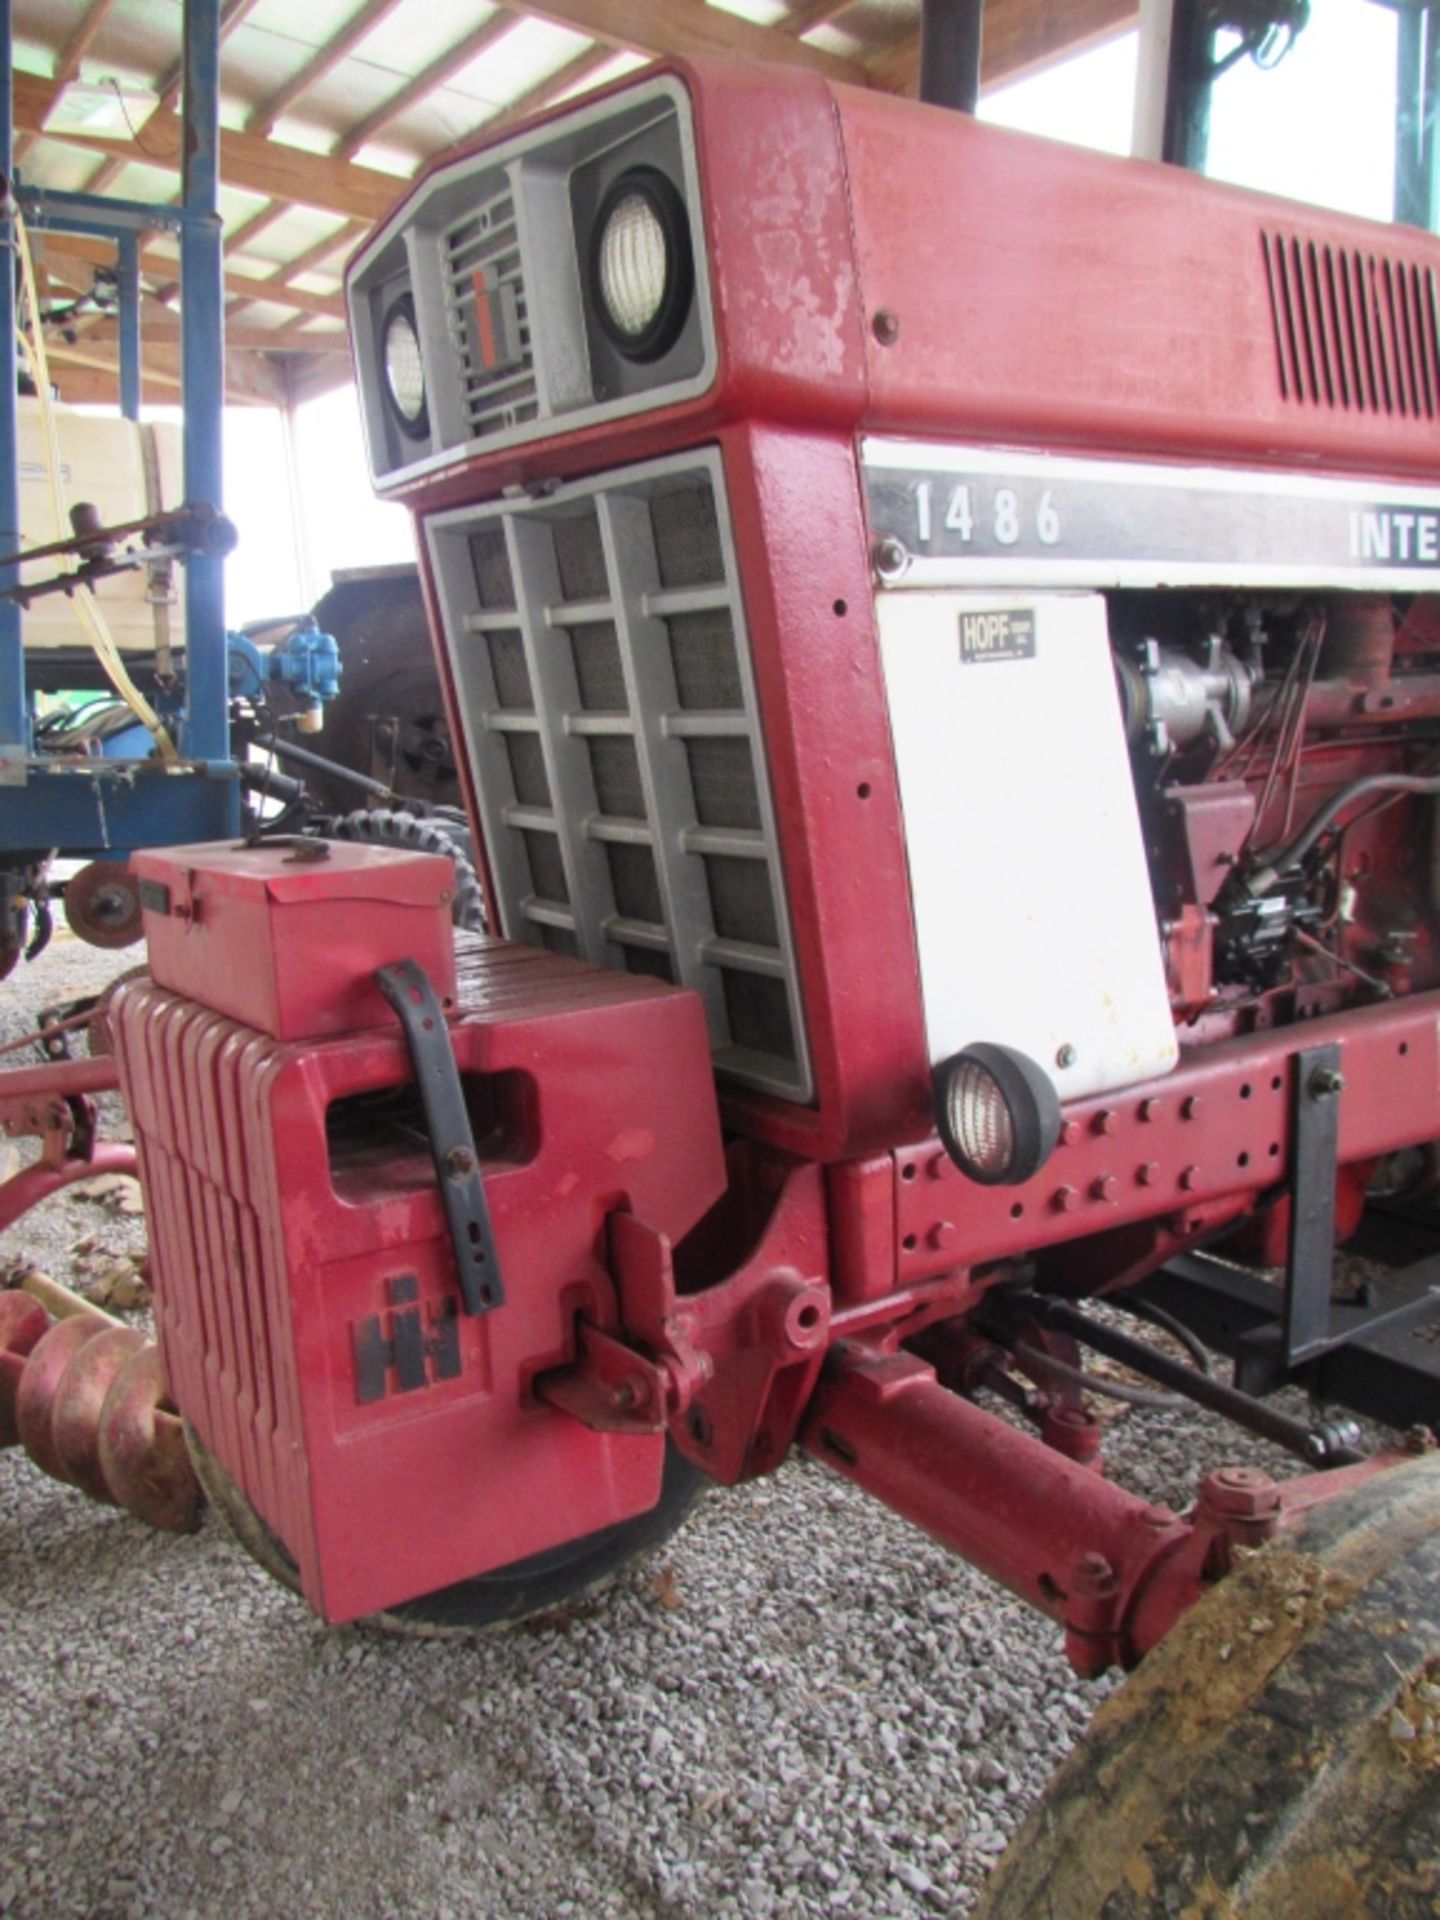 1977 1486 International w /Duals 2 Hydraulic Outlets - Image 7 of 24